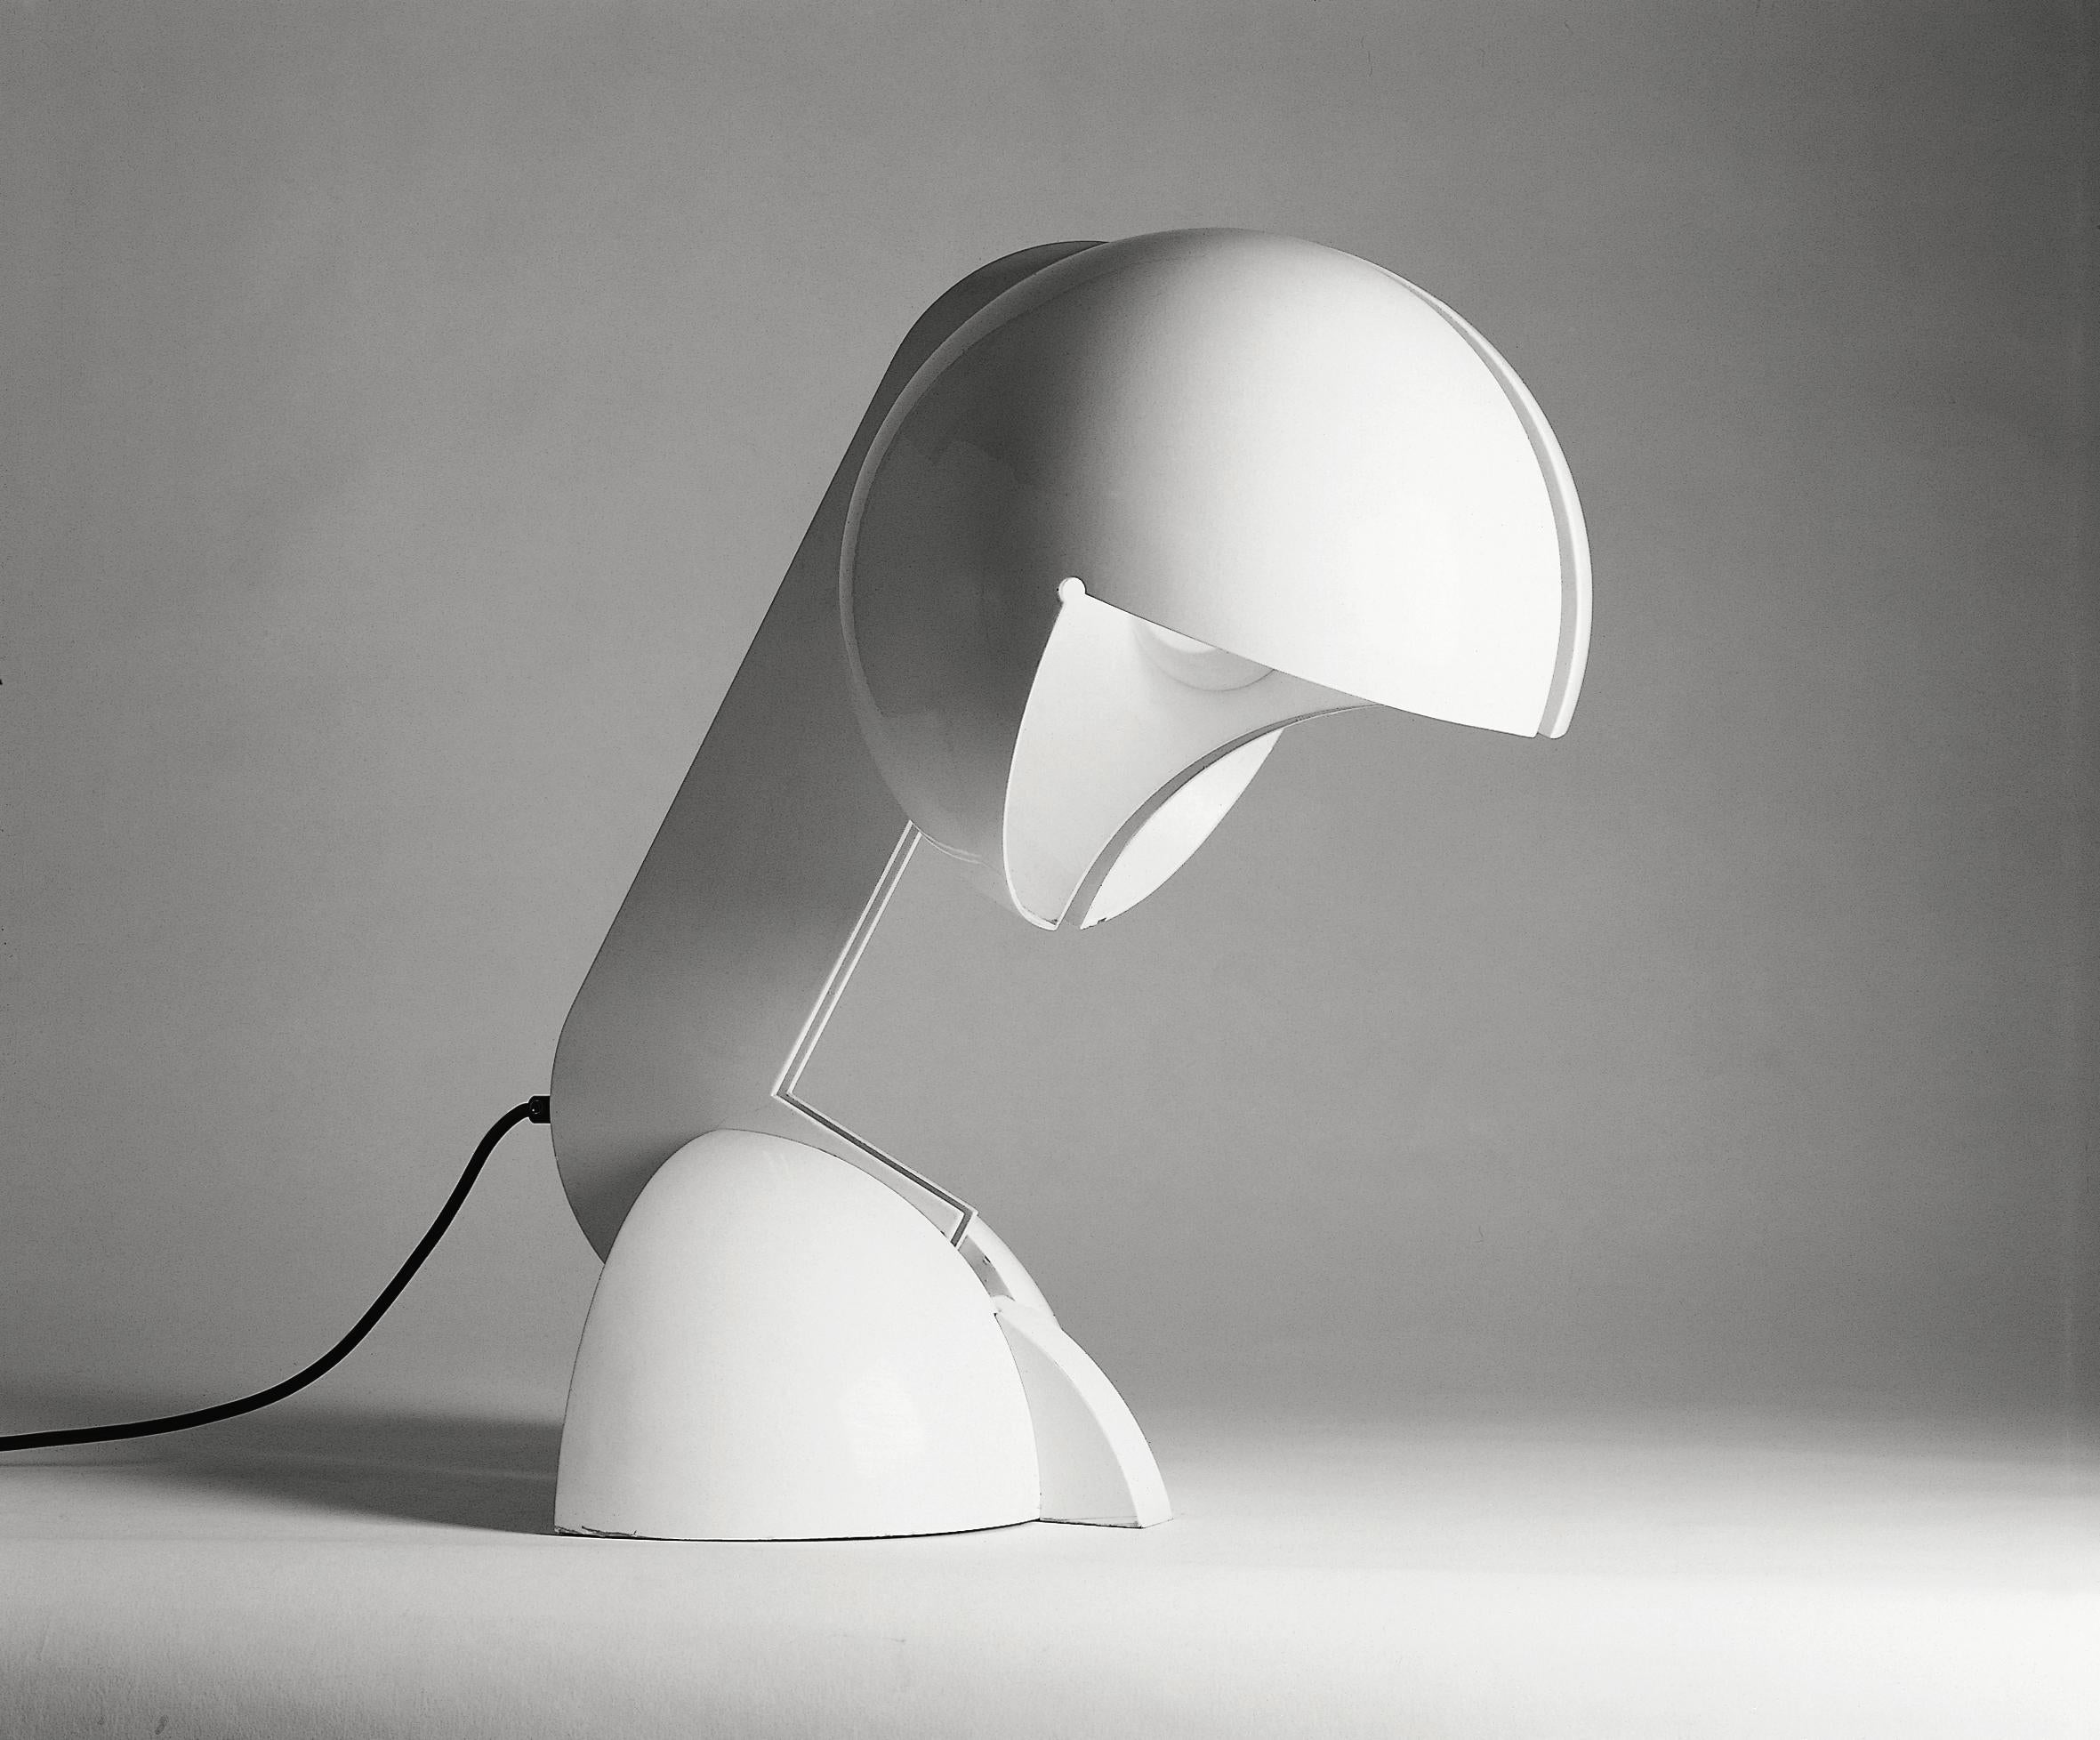 Table lamp with direct and indirect light, in white lacquered metal, the arm is jointed on the base, two reflectors turn around the upper part of the arm each one independently from the other. 


Technical specifications:
Material: 
Structure: